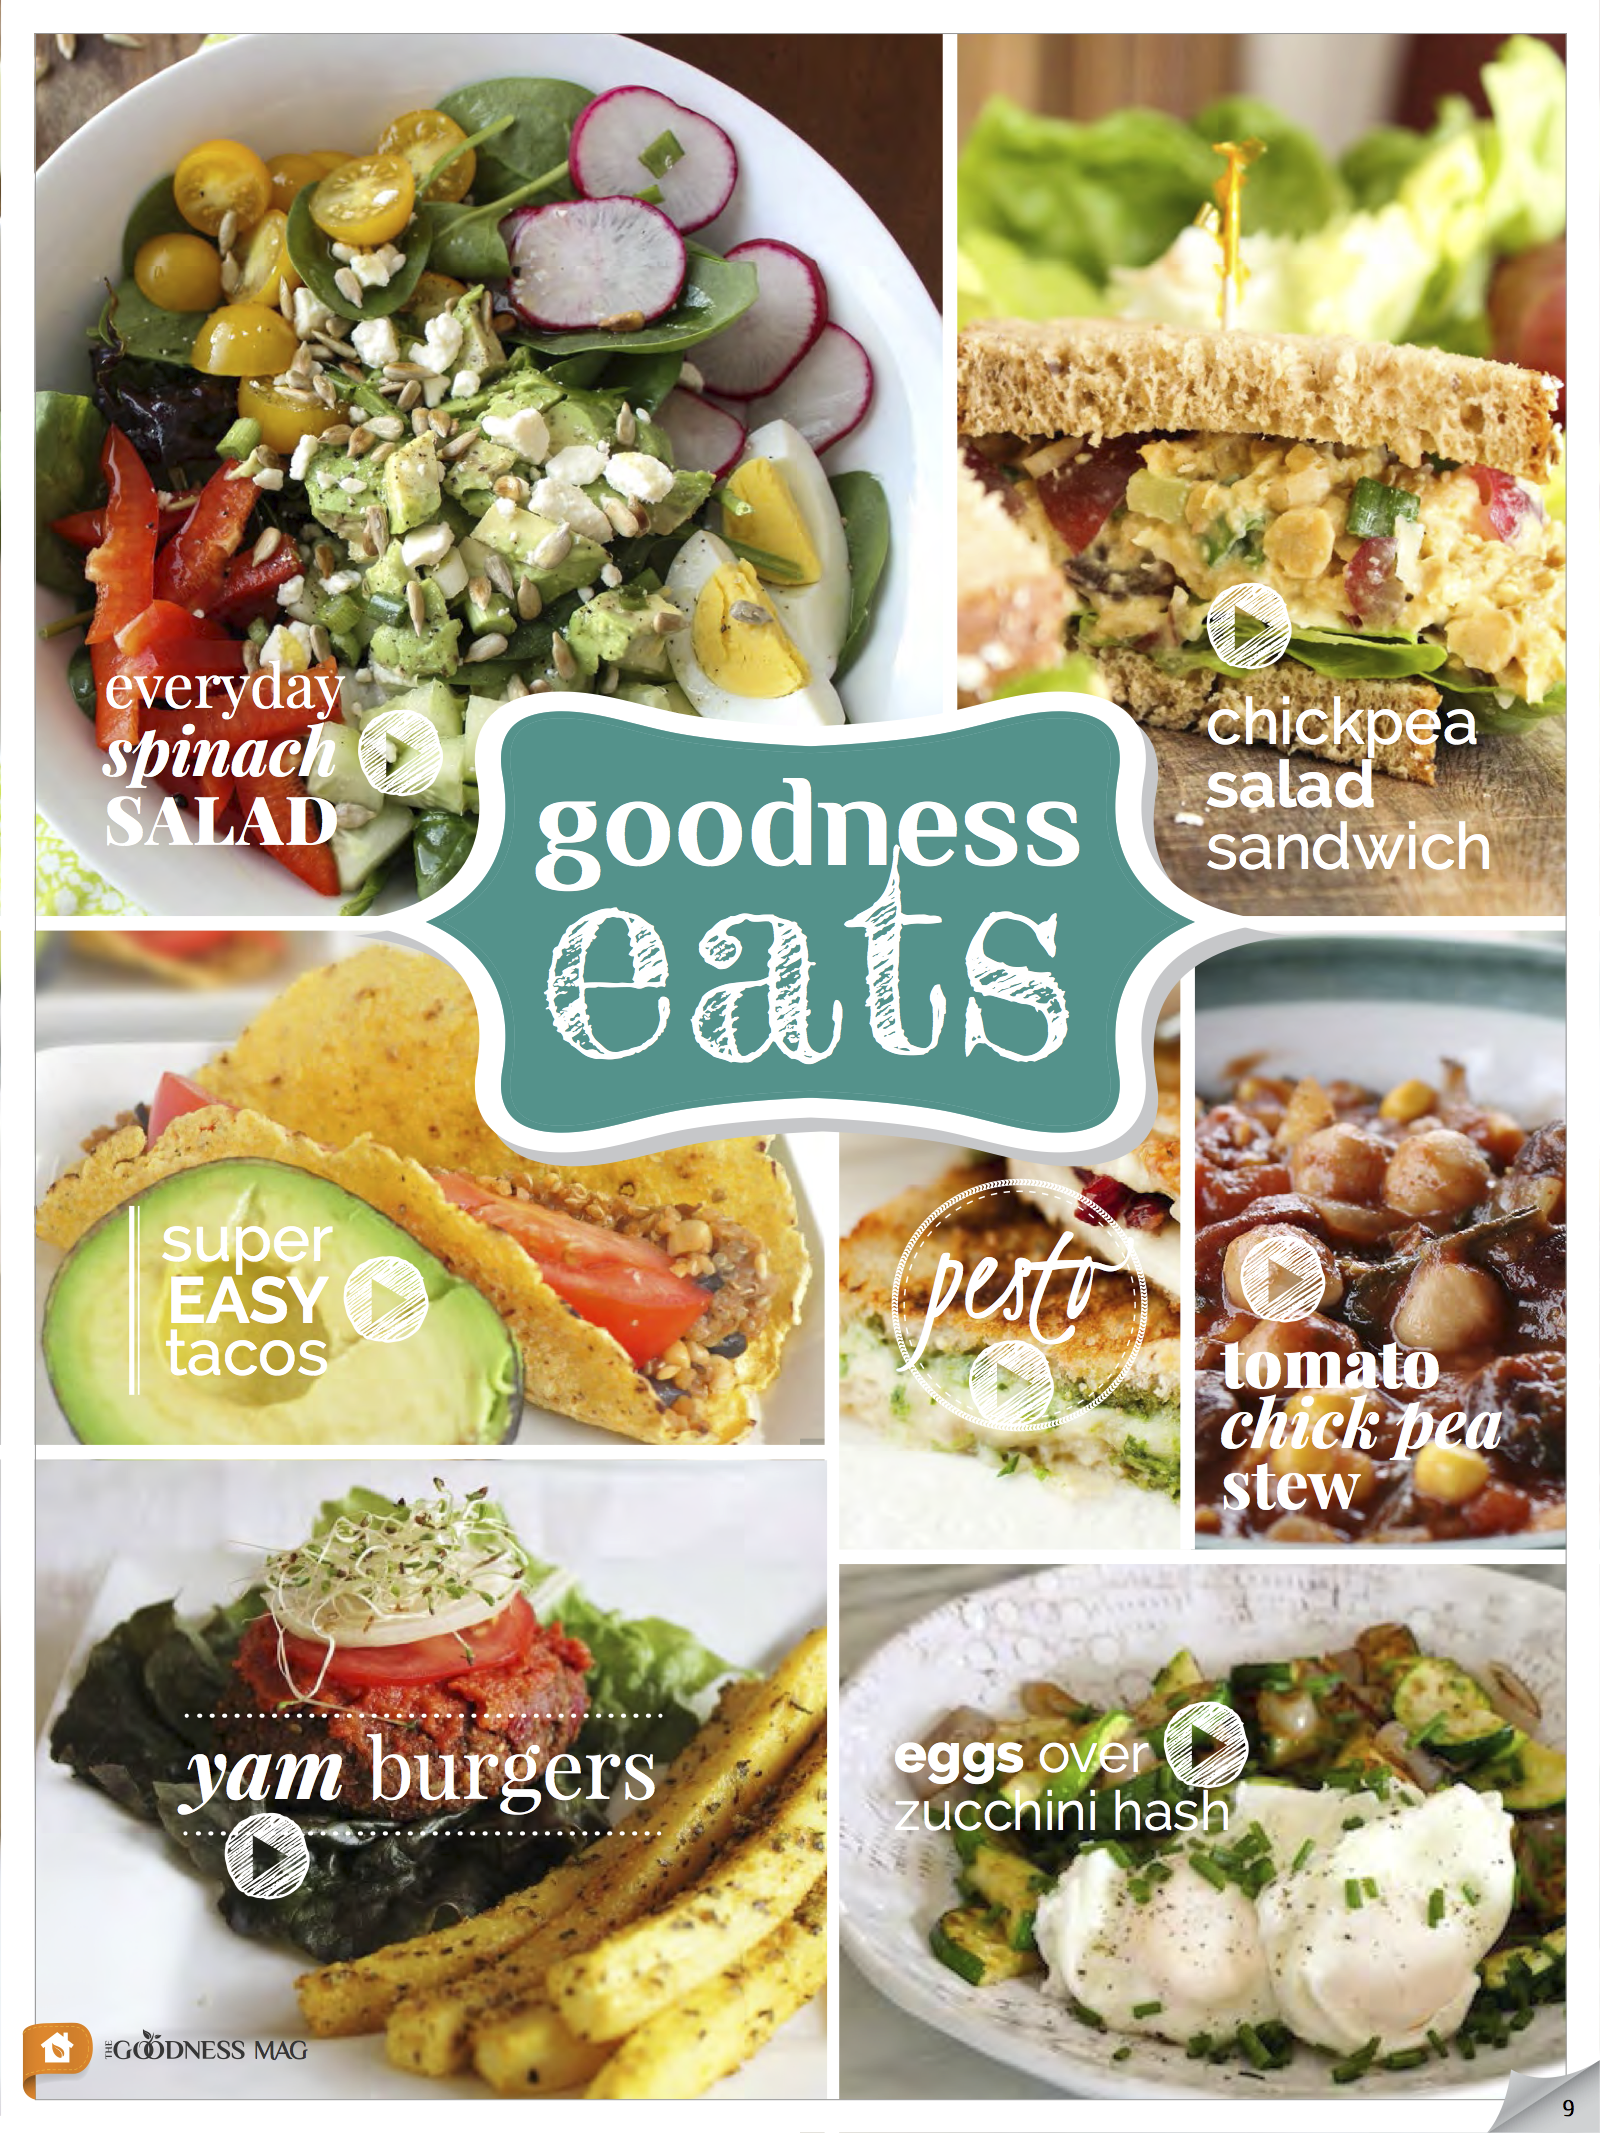 Healthy meal inspirations - The Goodness Magazine